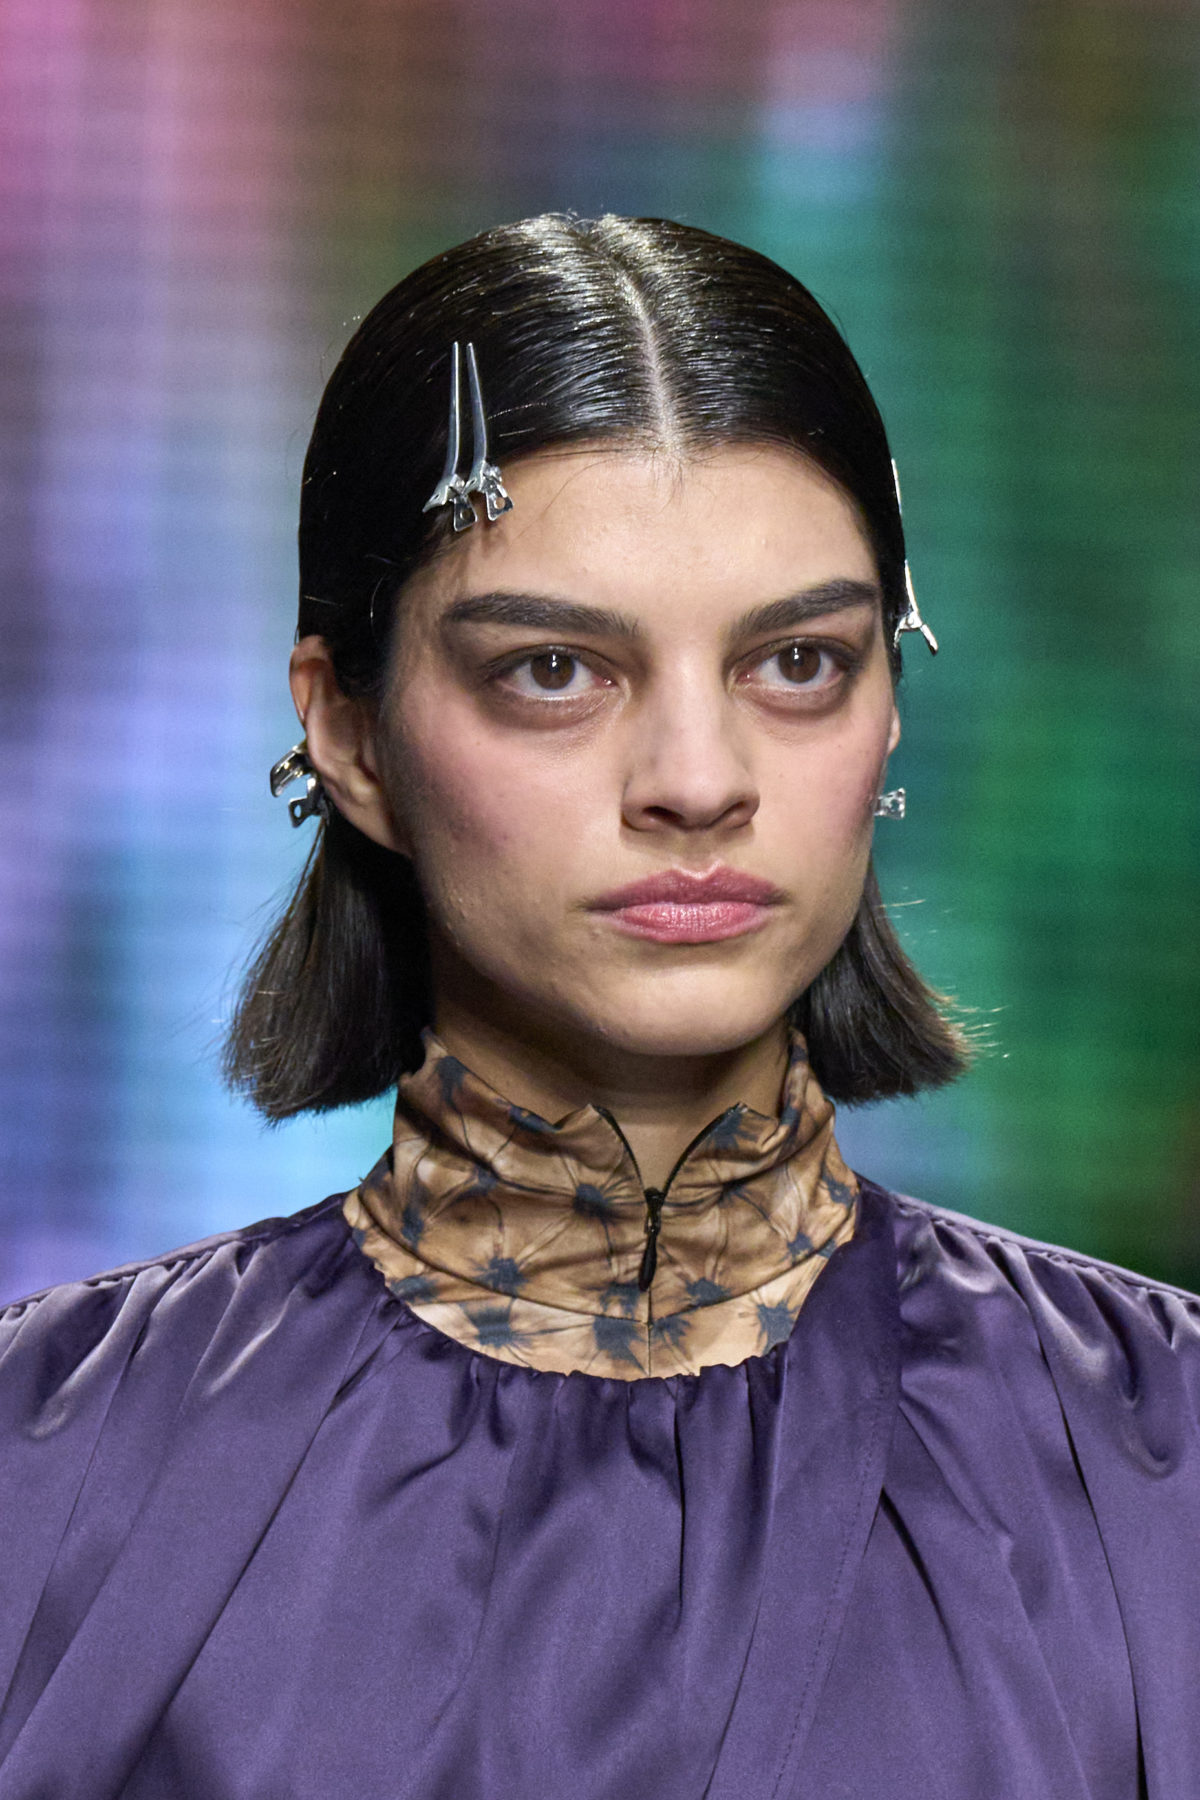 Milan Fashion Week 2022: All The Beauty Trends From The Runways ...